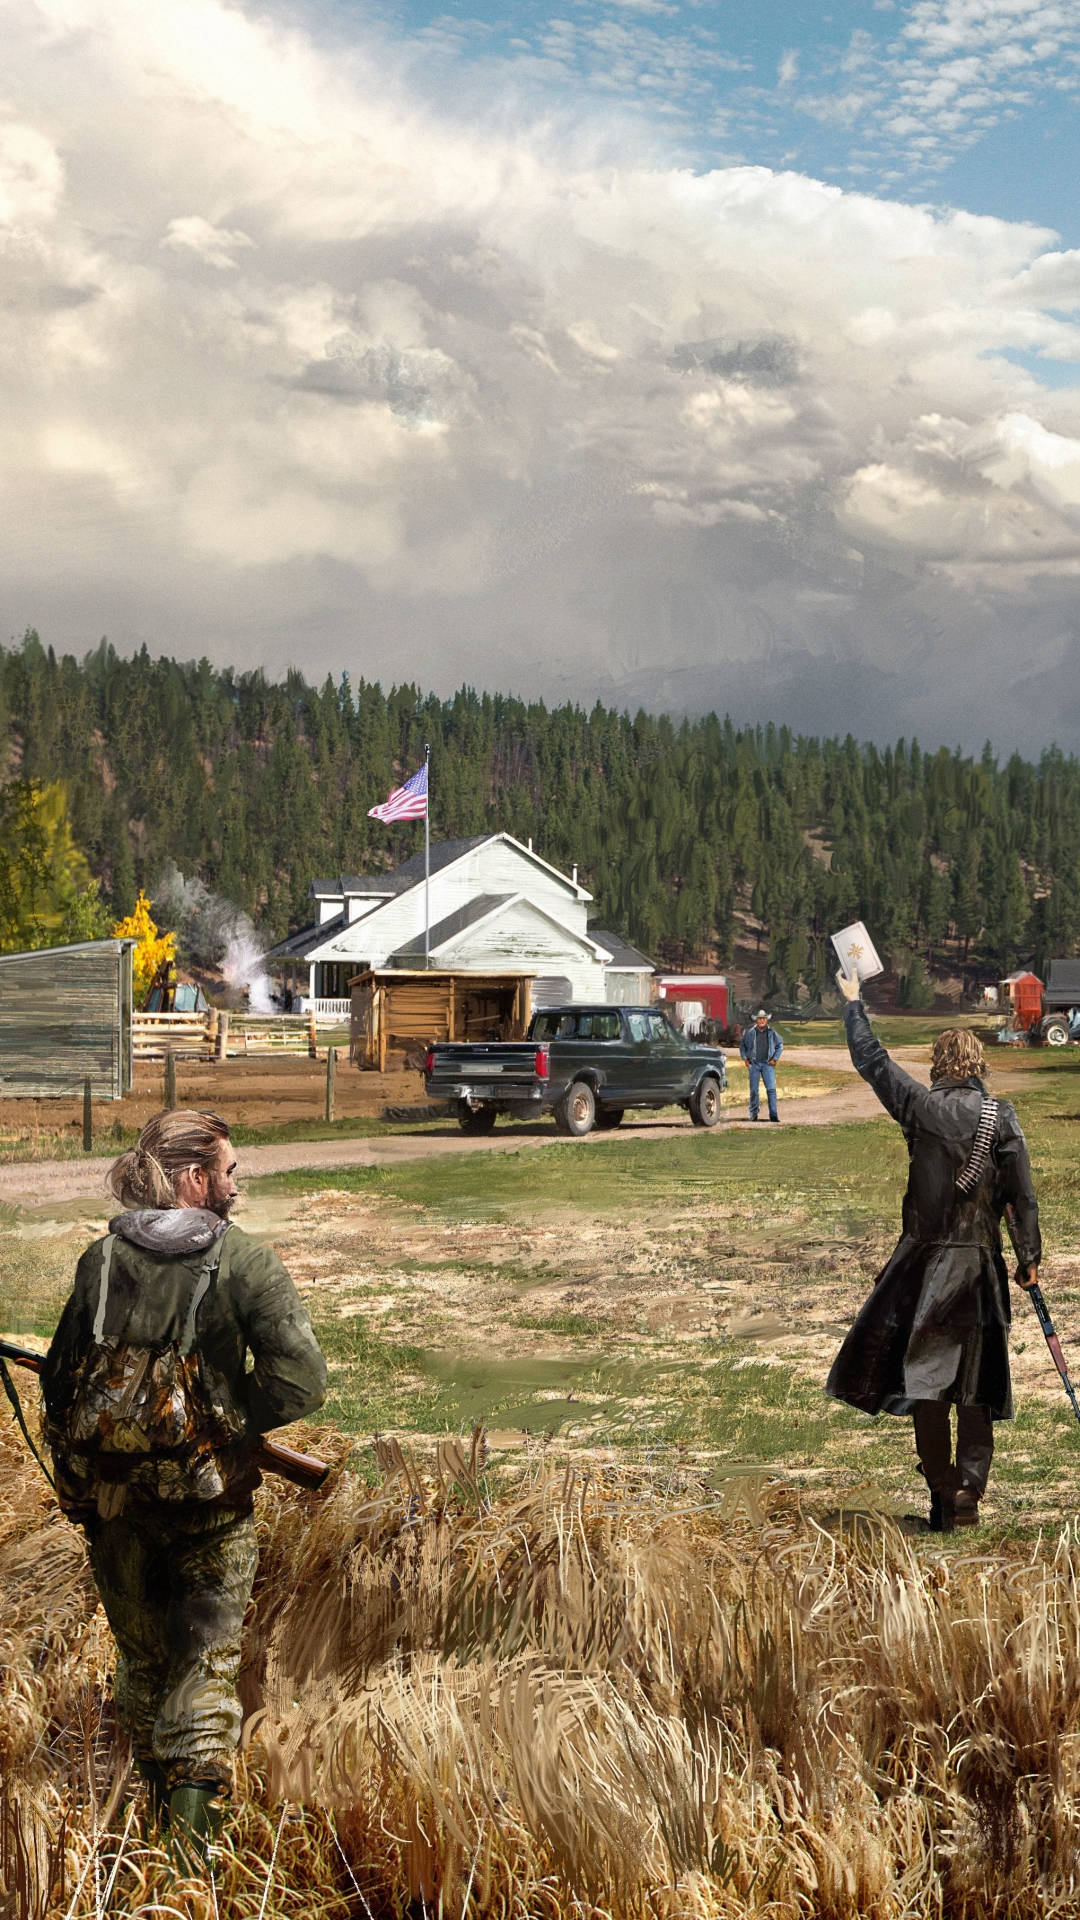 Download Far Cry 5 Enemies On Farm Iphone Wallpaper | Wallpapers.Com